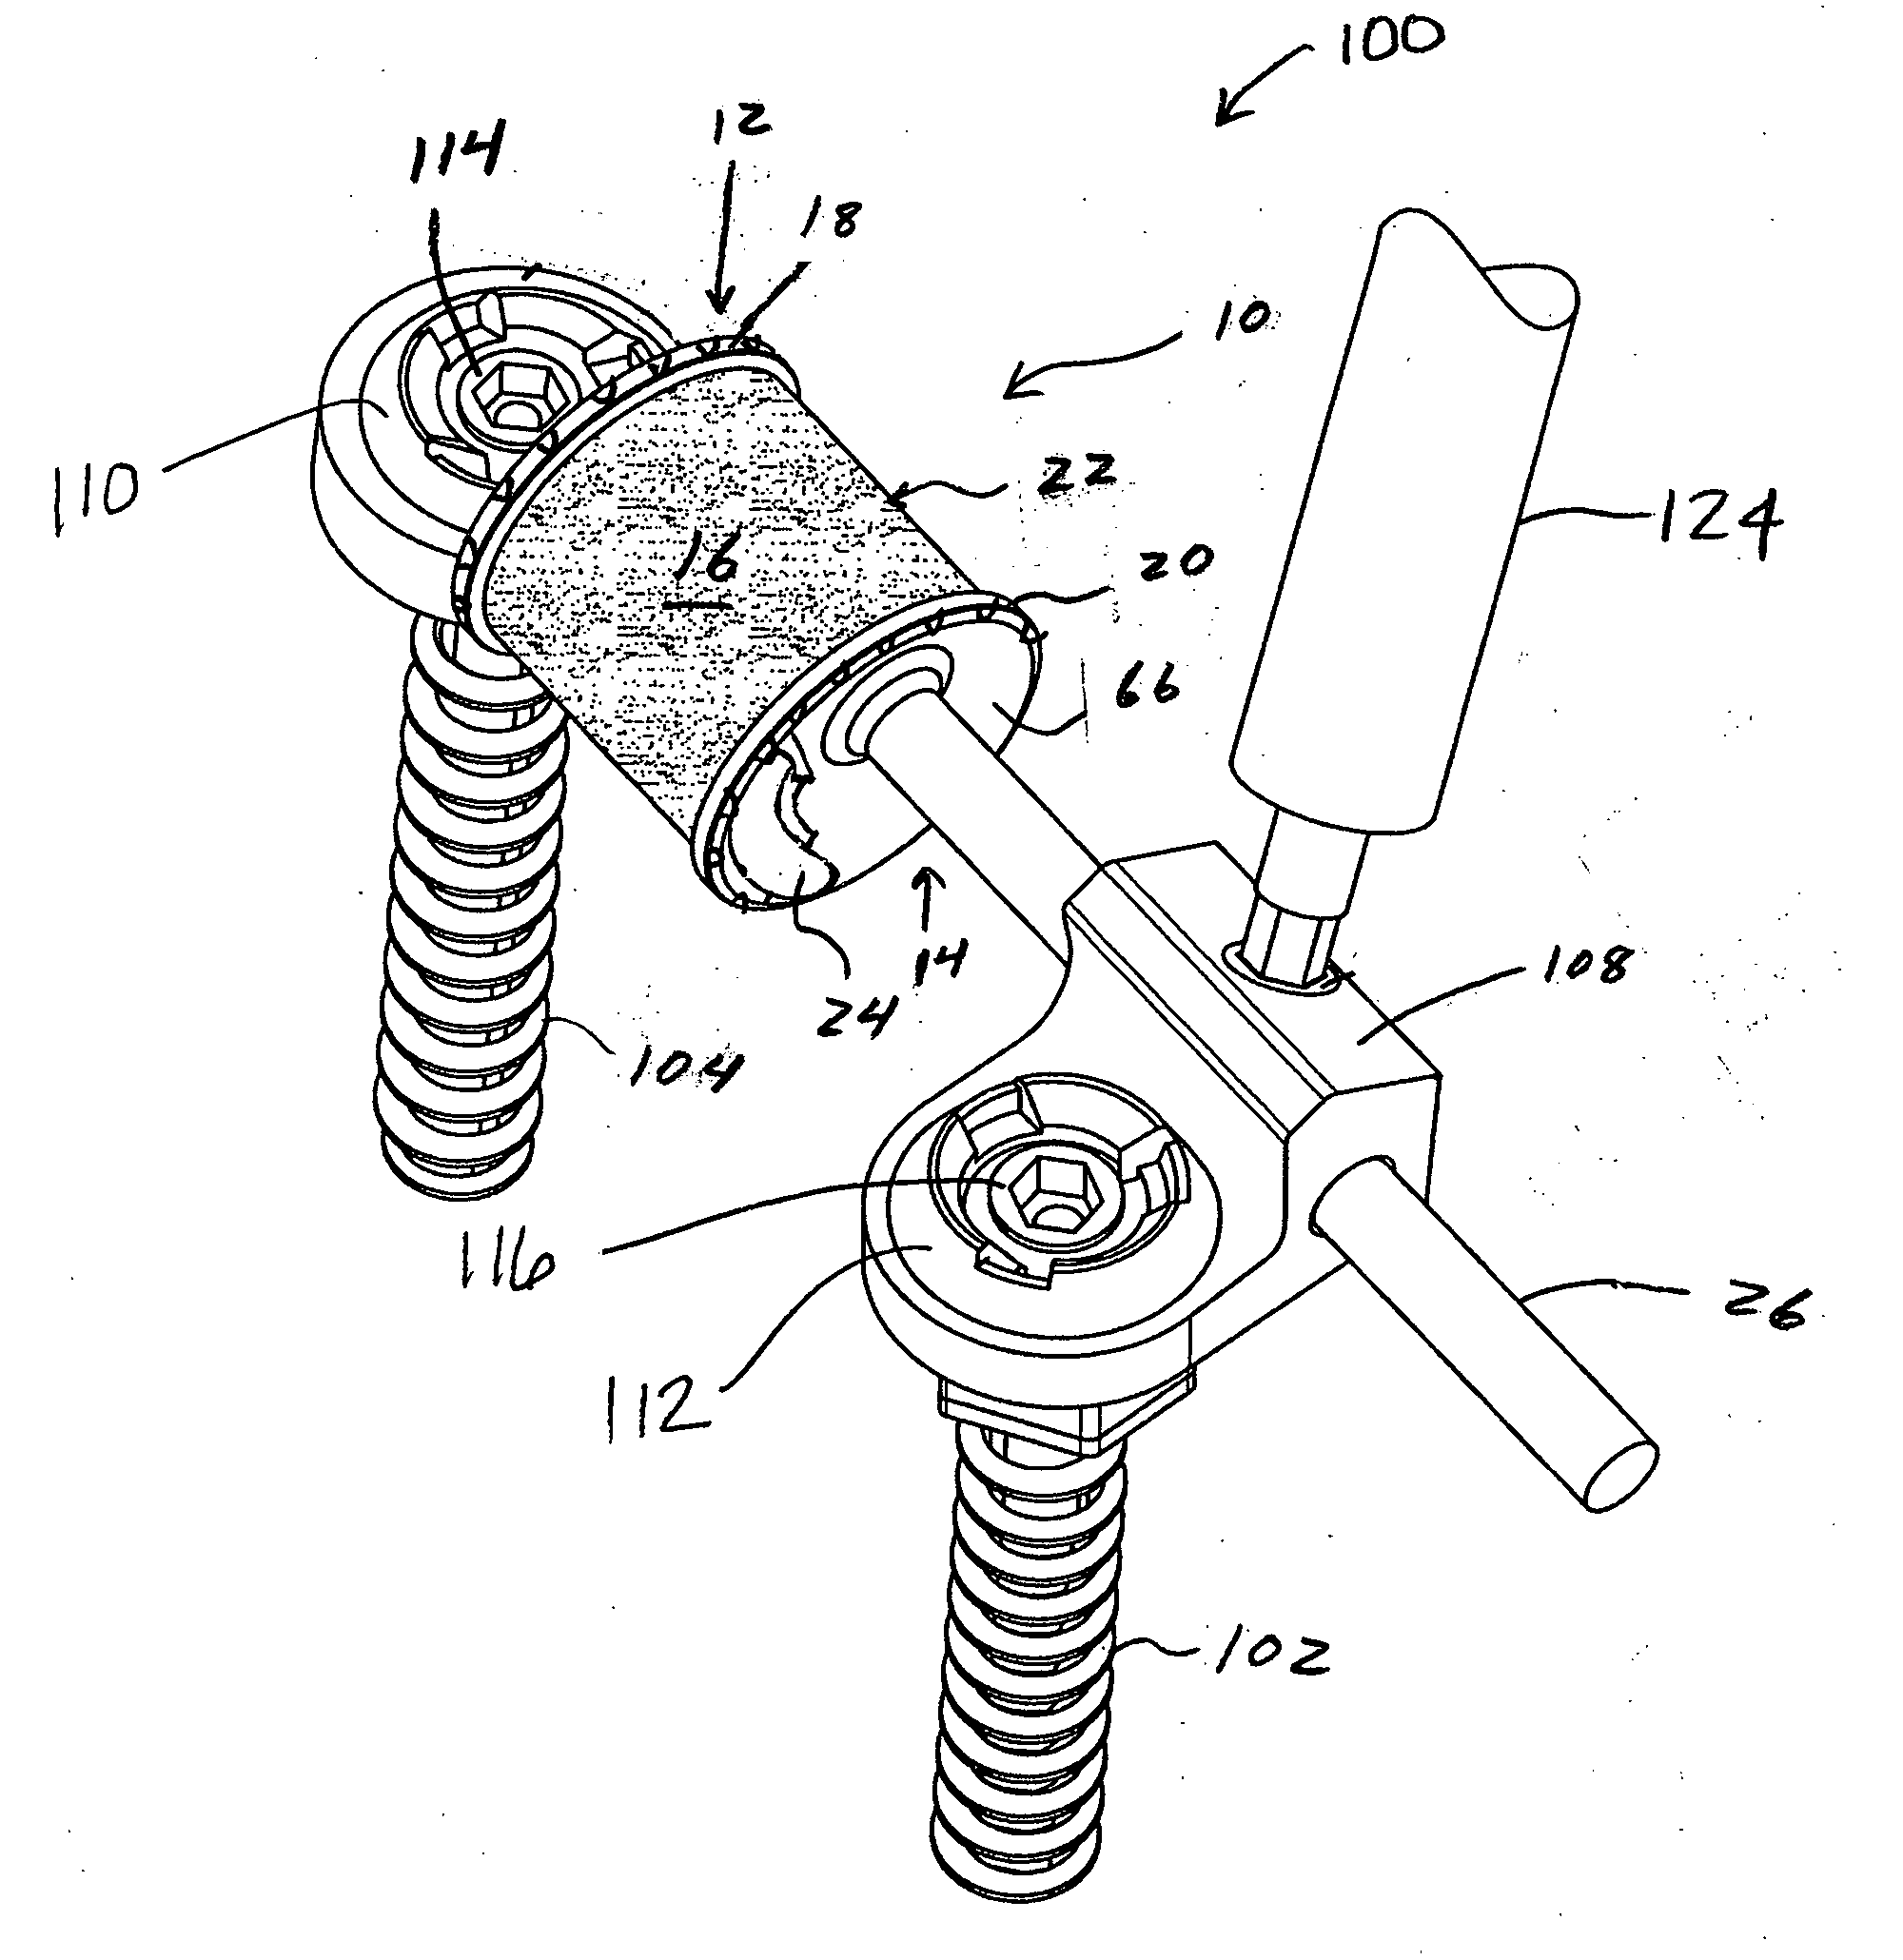 Sheath assembly for spinal stabilization device